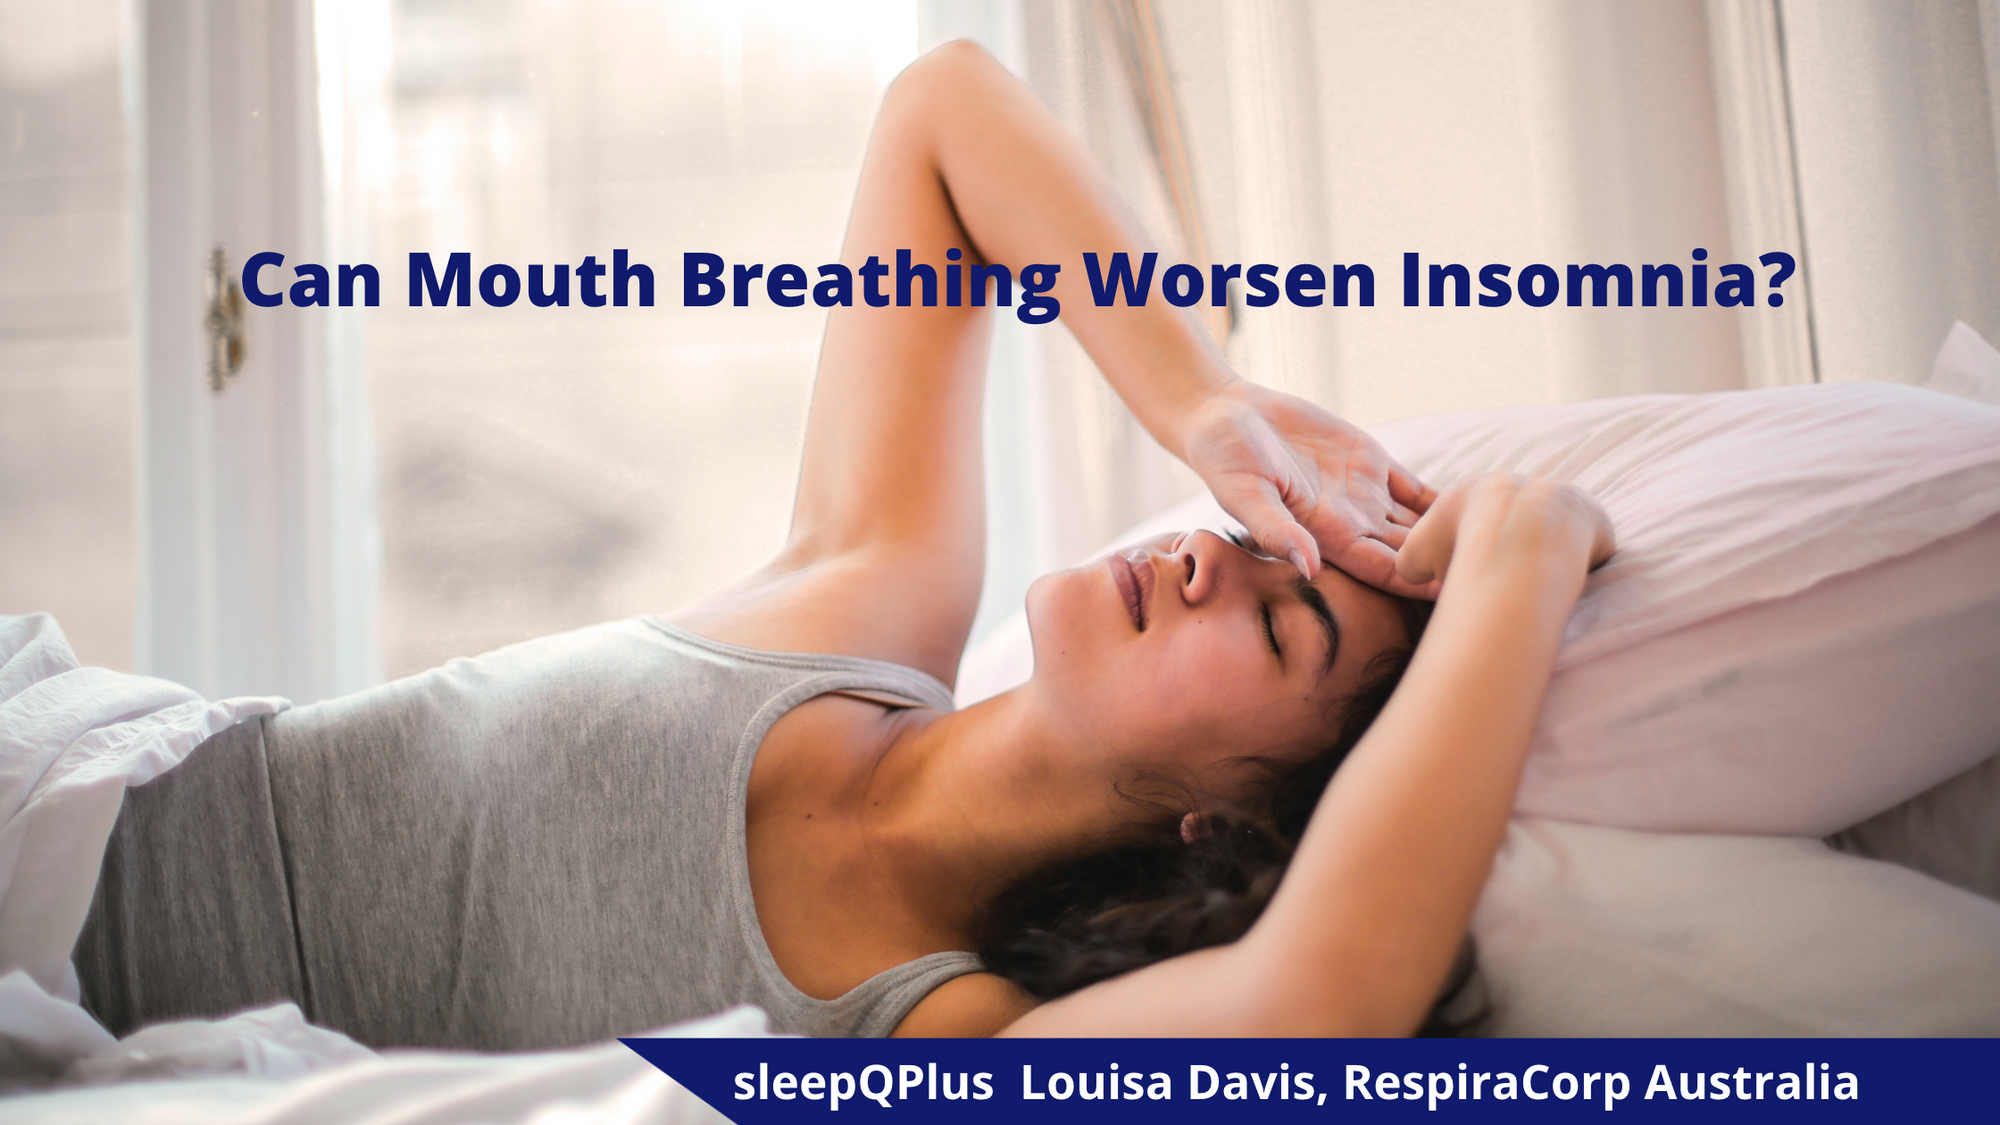 Can mouth breathing worsen insomnia?